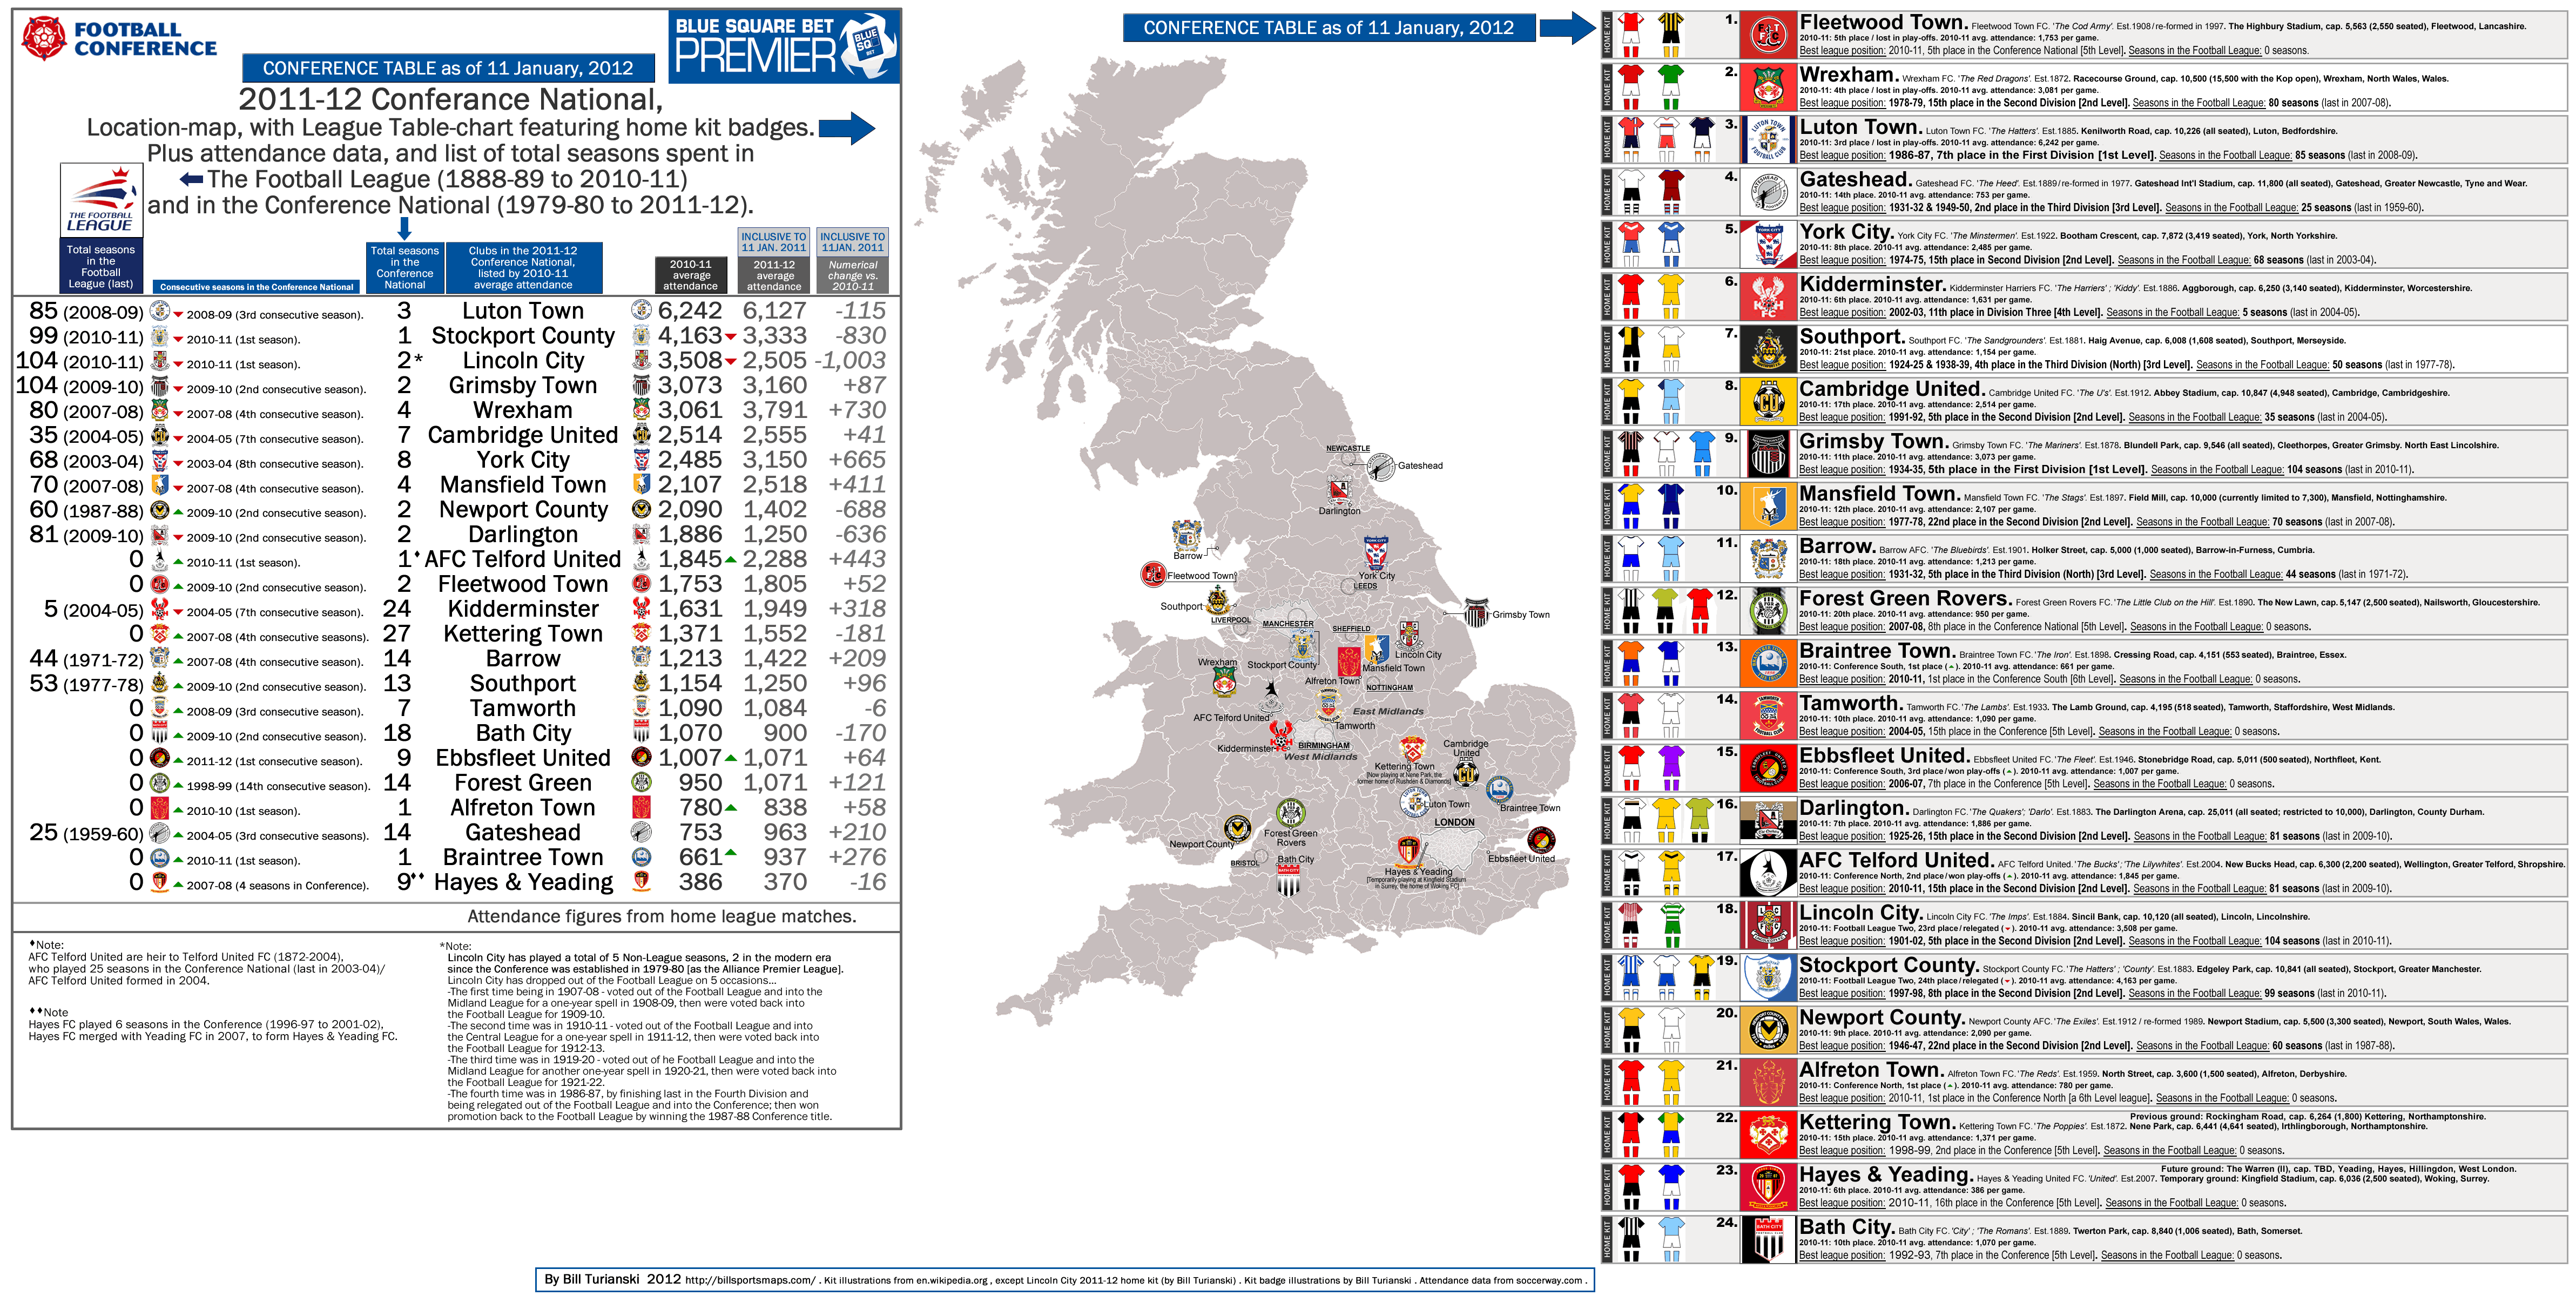 English Football League Championship – attendance map and data for clubs in  the 2011-12 League Championship season. «